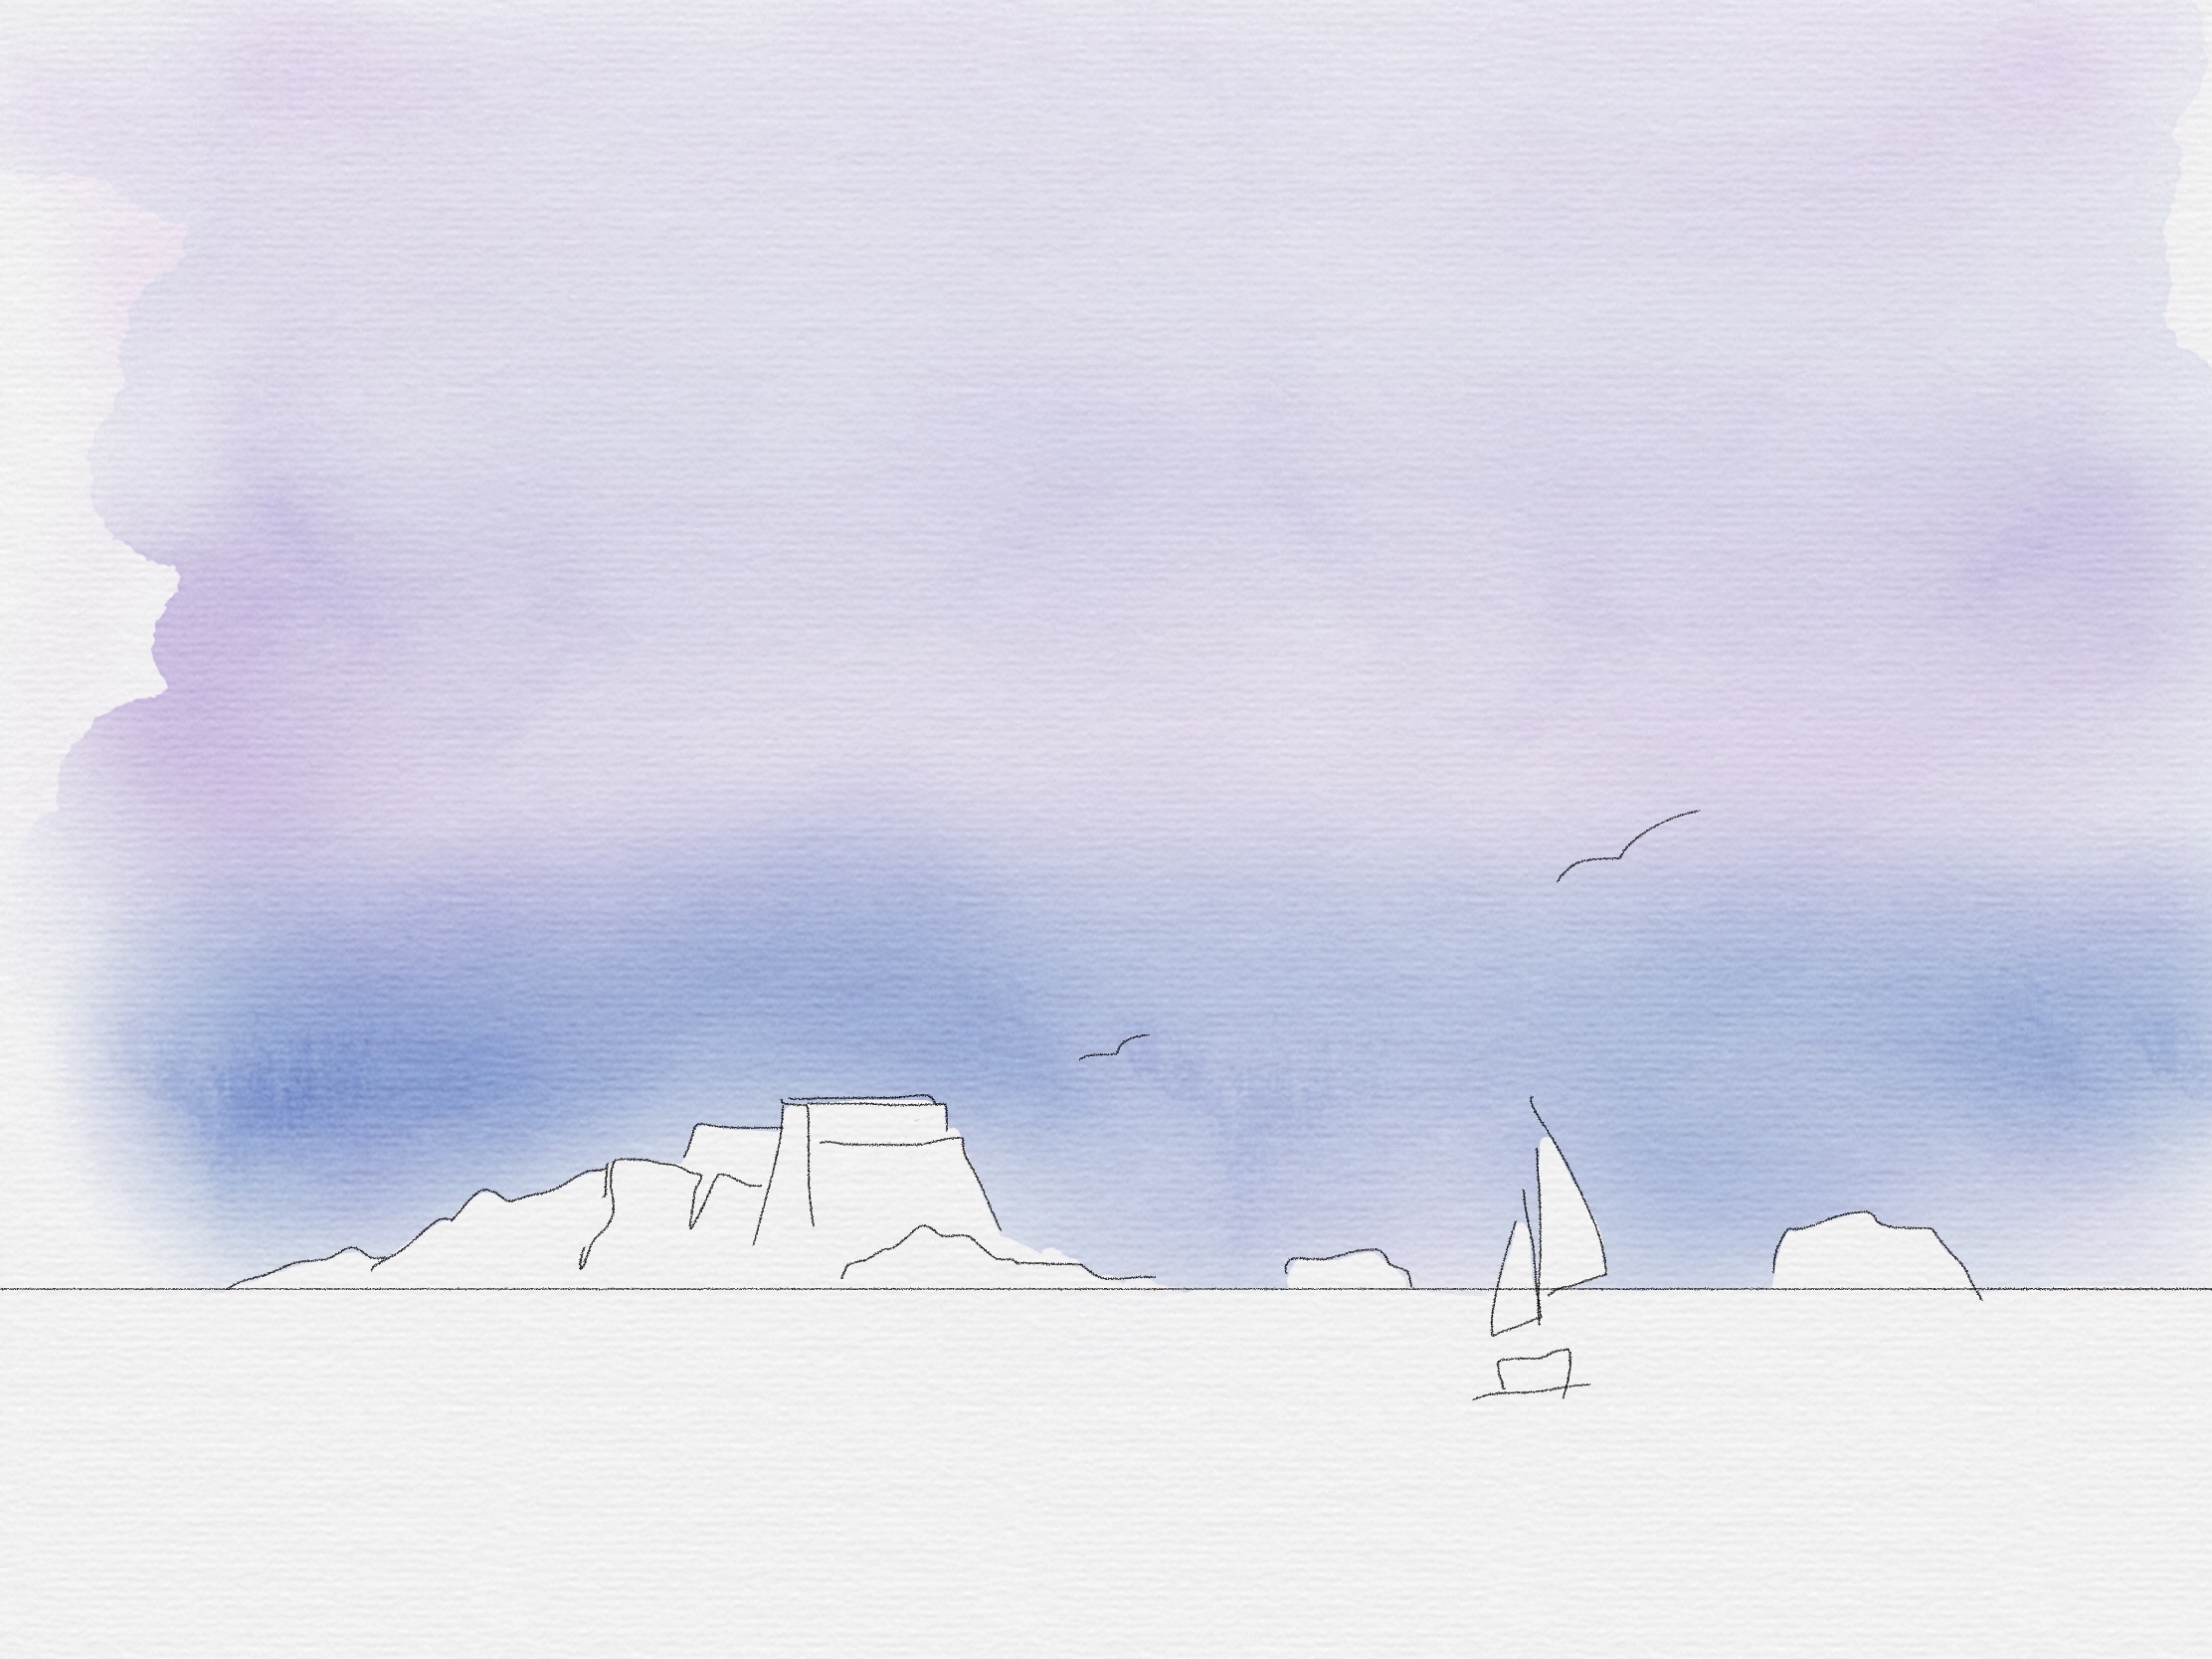 Rough outline of lines and shapes. The sky is painted blue and purple in watercolour.